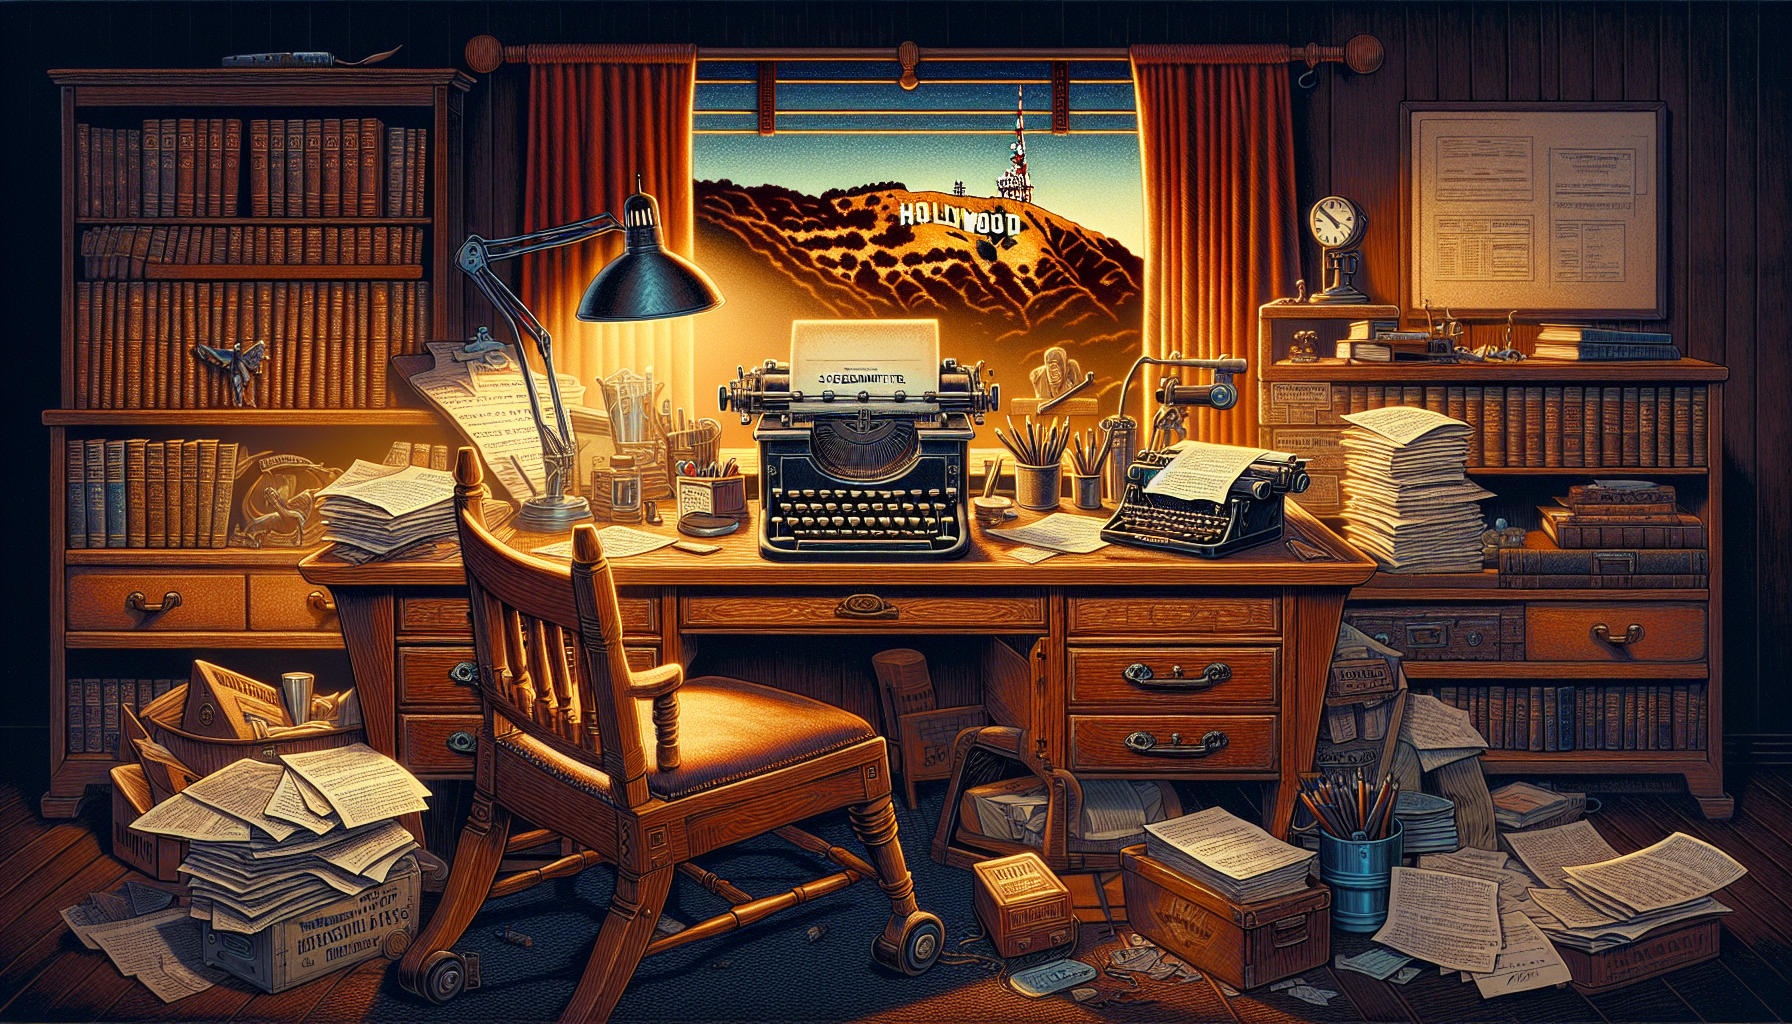 A vintage wooden desk covered with different types of screenwriting contracts, a classic typewriter, a stack of screenplays, and a Hollywood sign model in the background, in a cozy, dimly-lit writer's